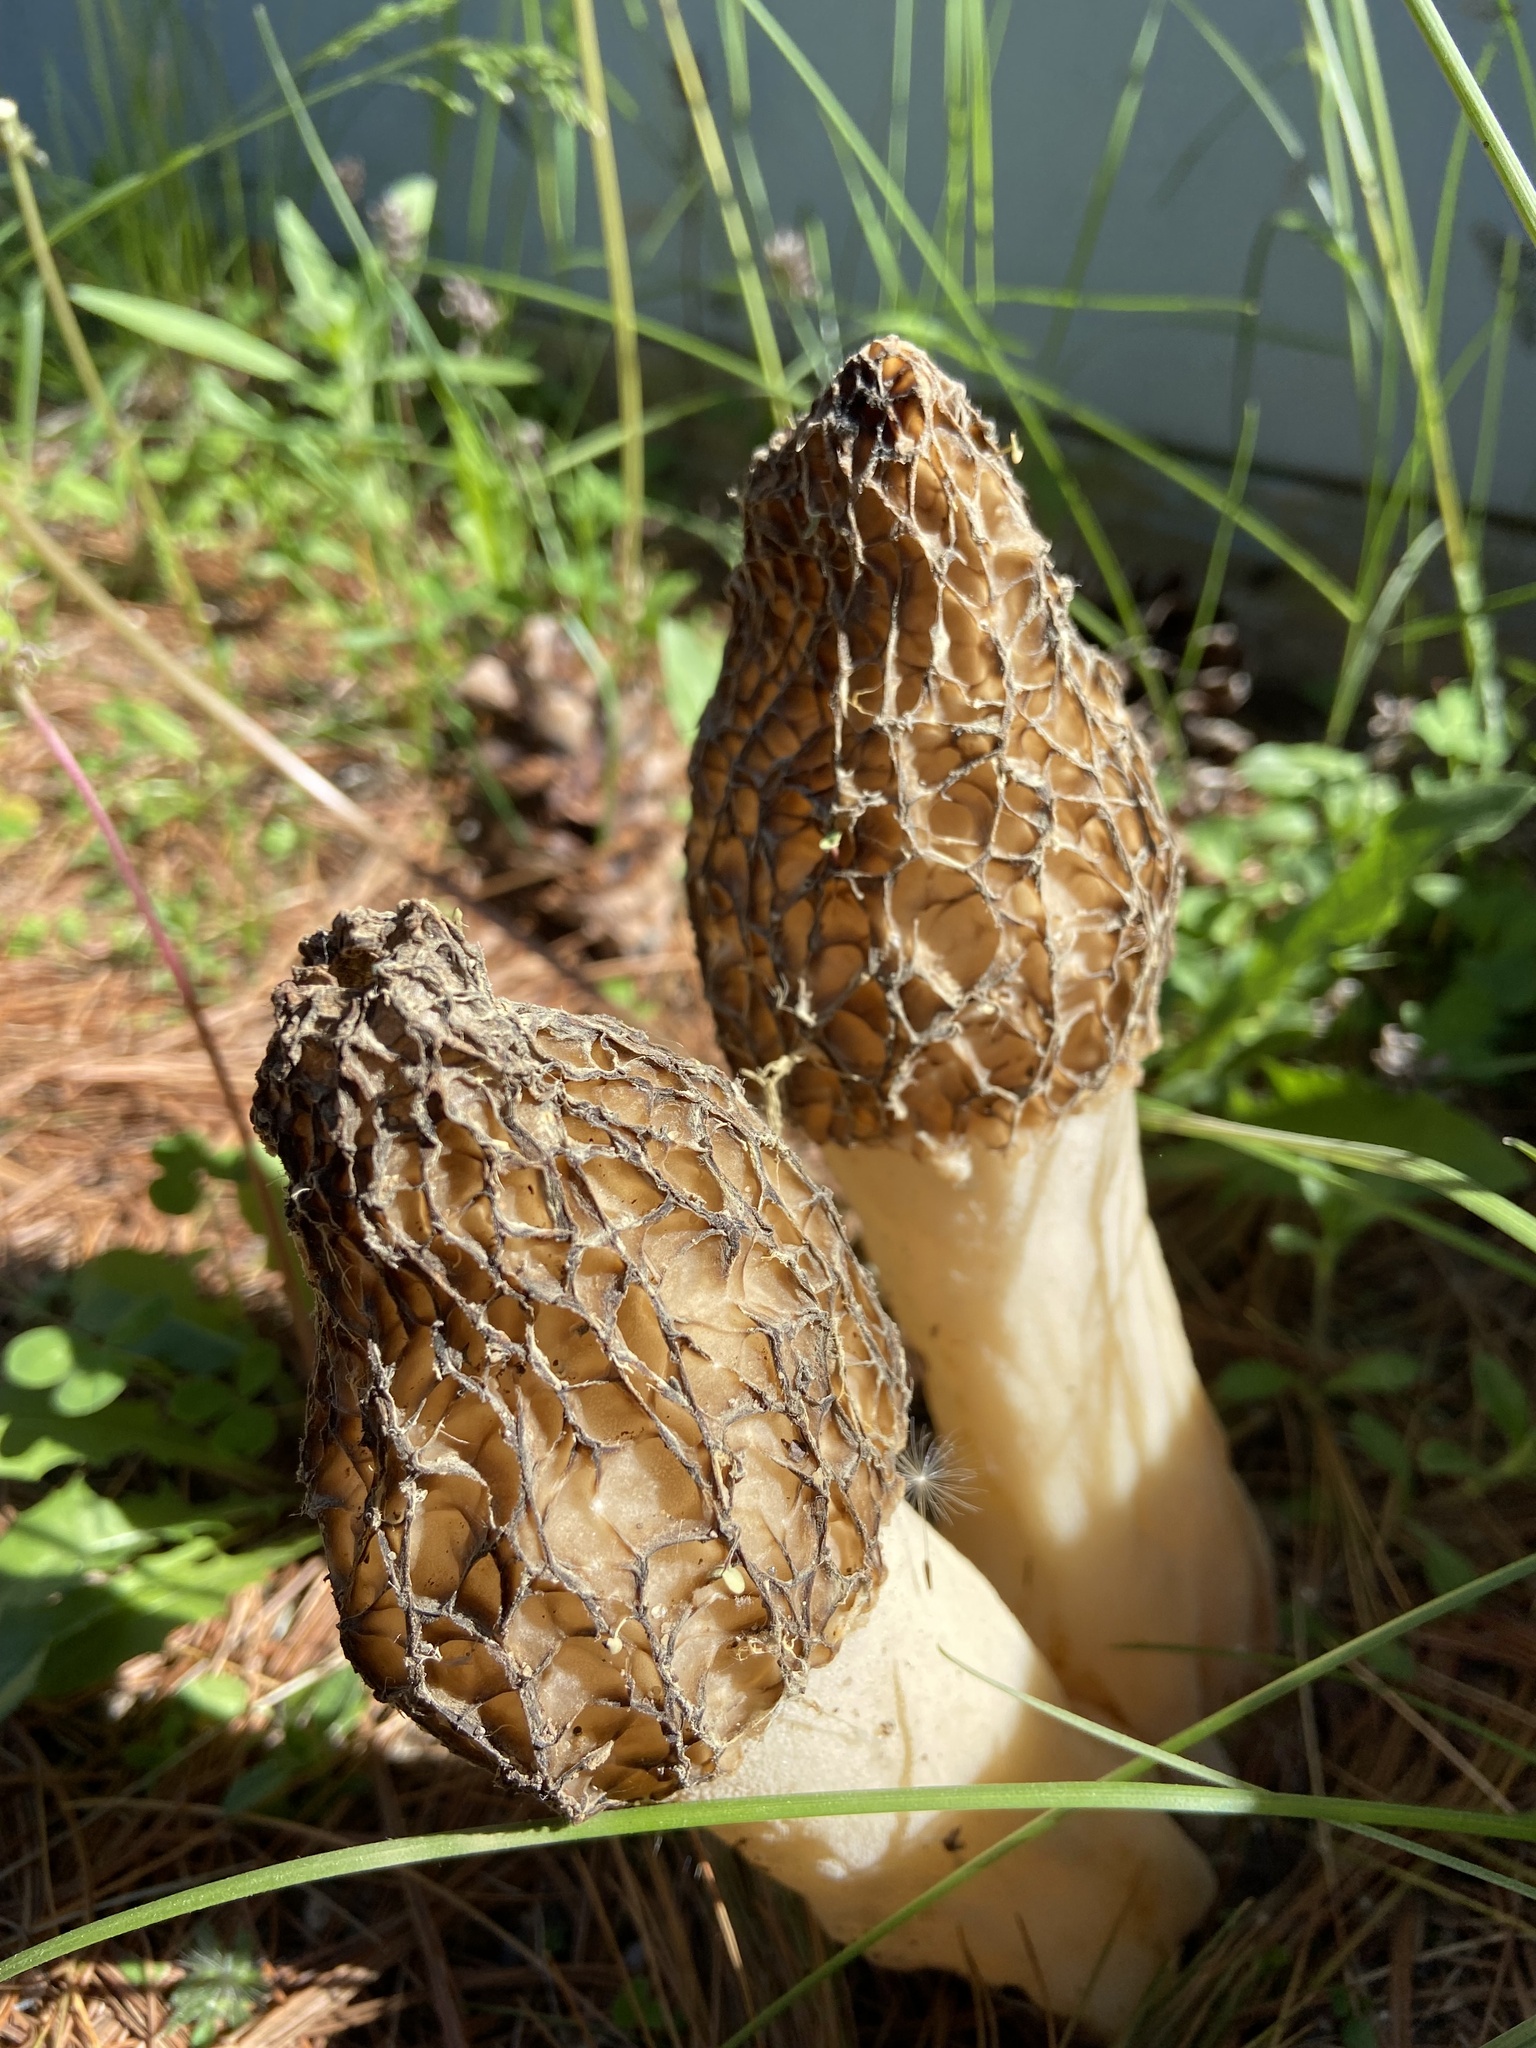 Two morel mushrooms are in sunlight. They have pale tan stalks and brown tops that are highly textured.